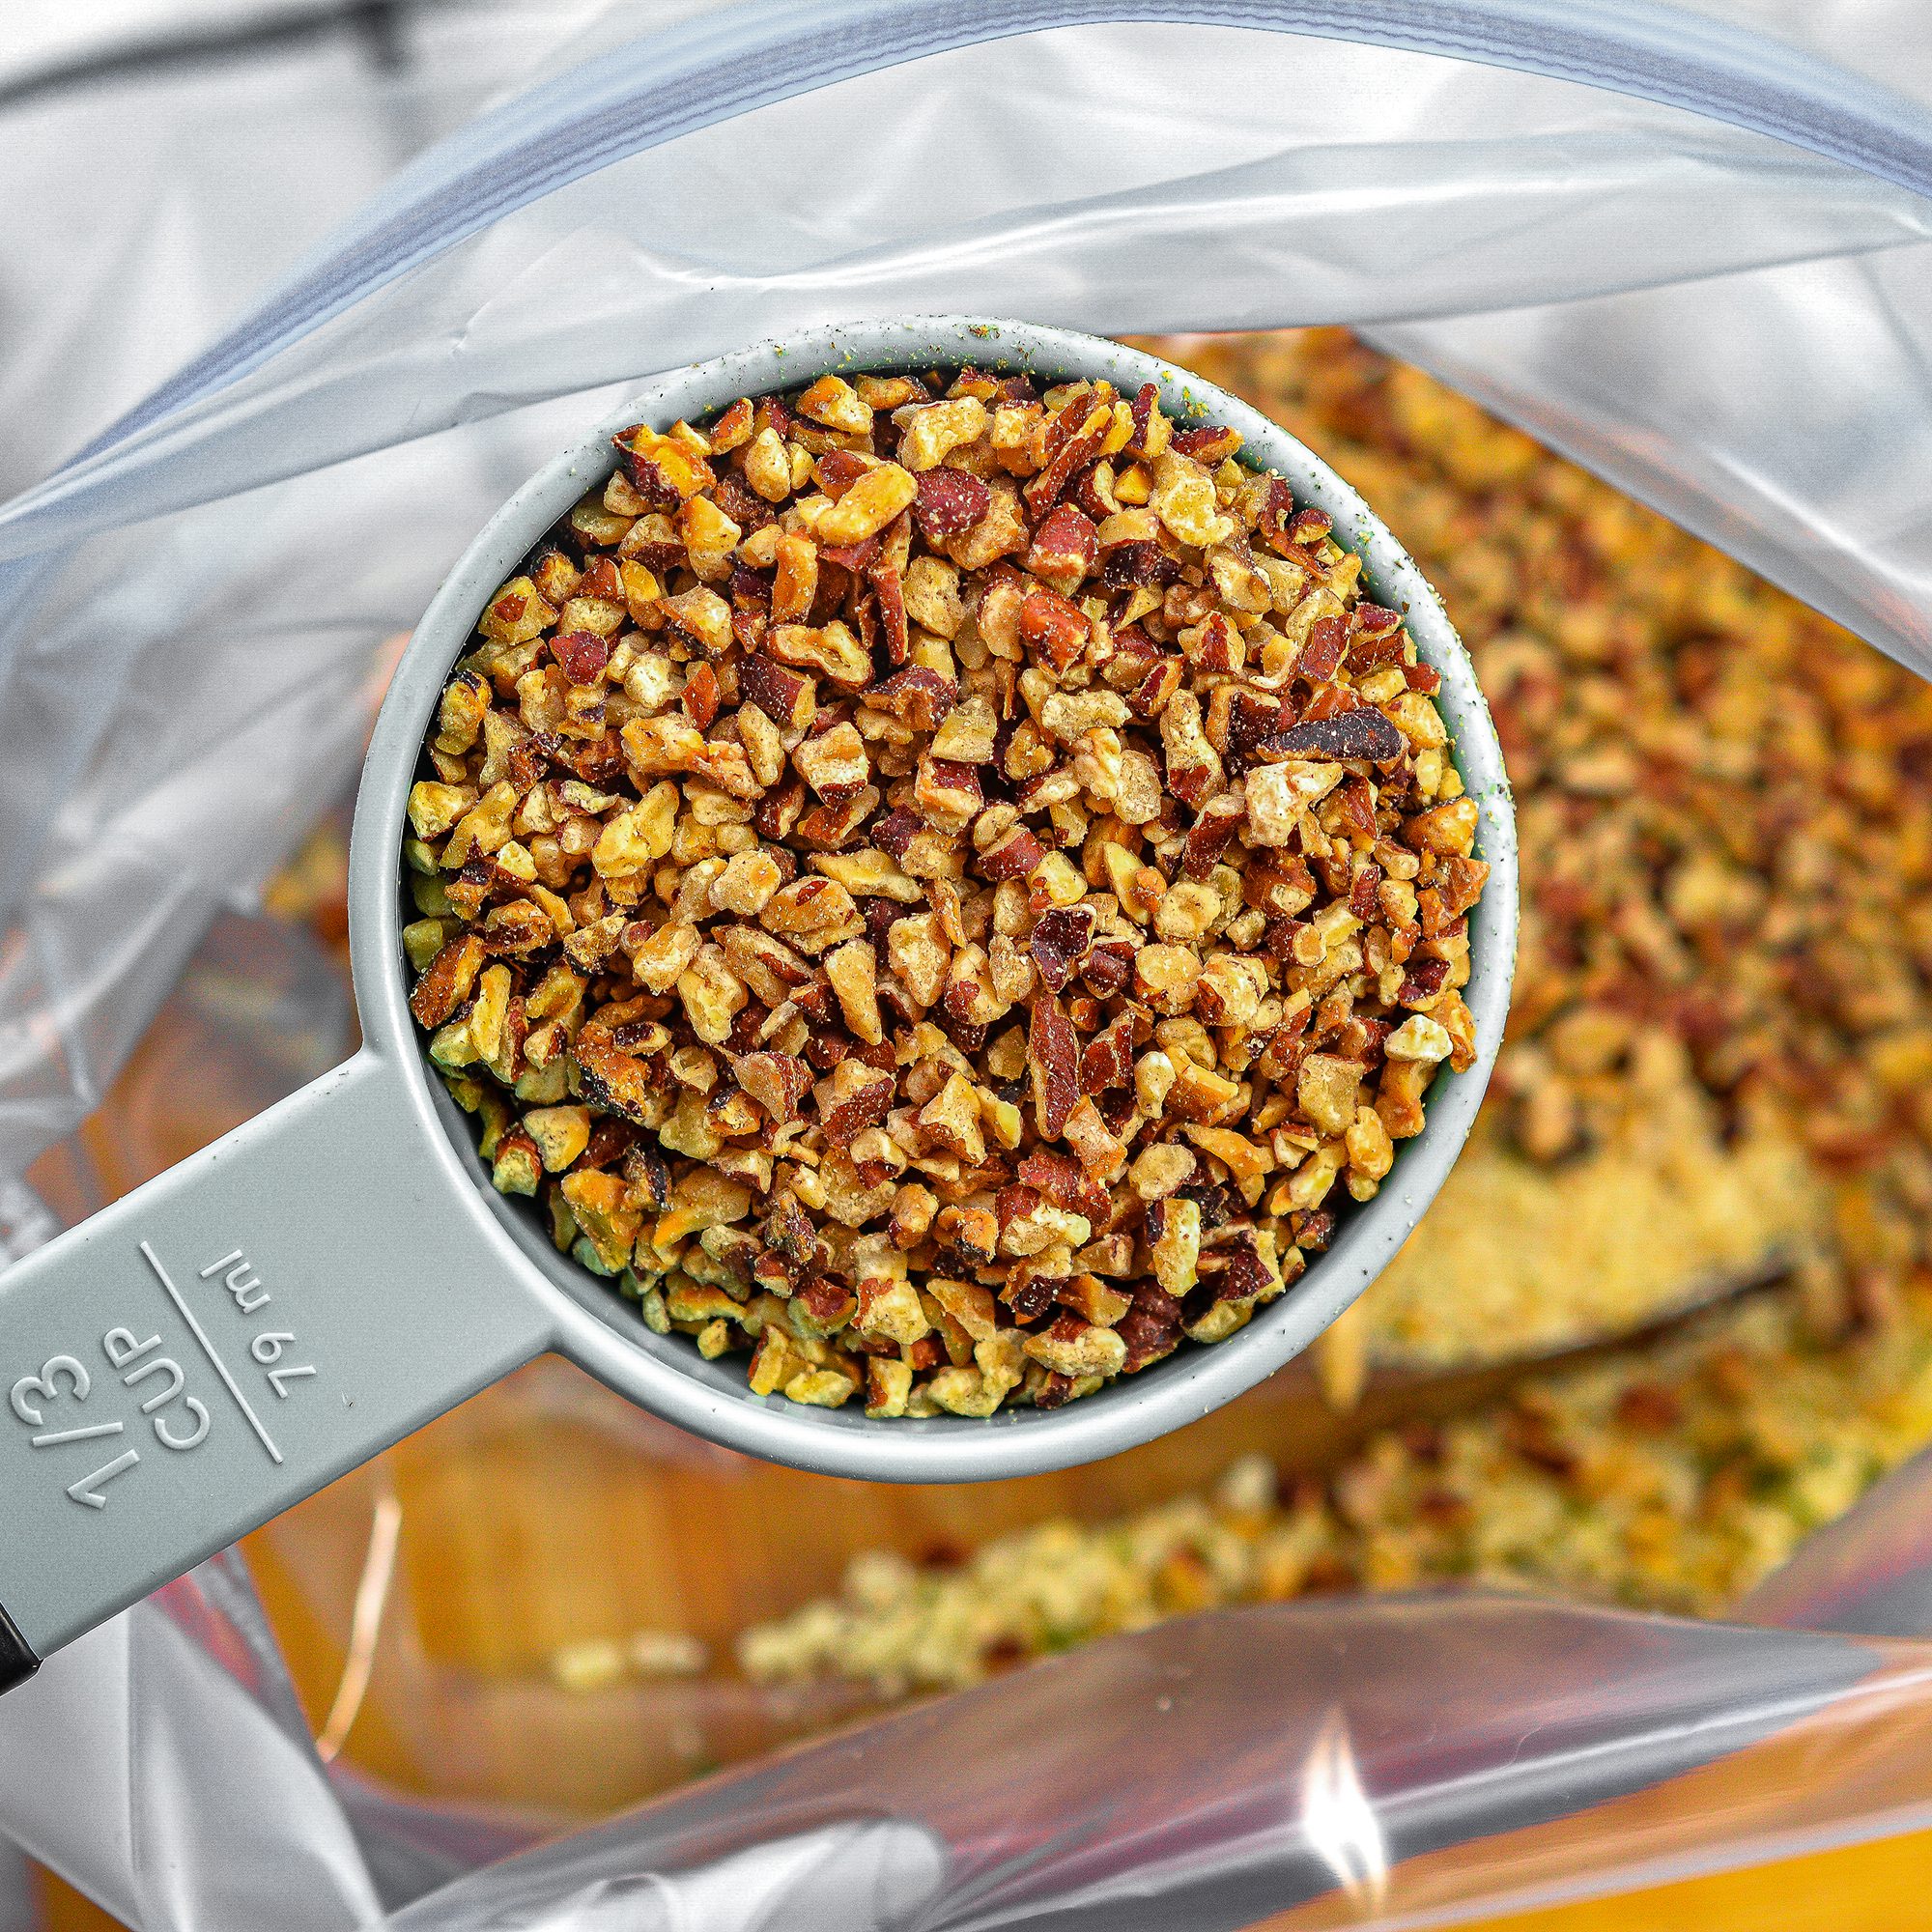 Place ⅔ cup of the chopped pecans into a Ziploc bag with the breadcrumbs and shake to combine.